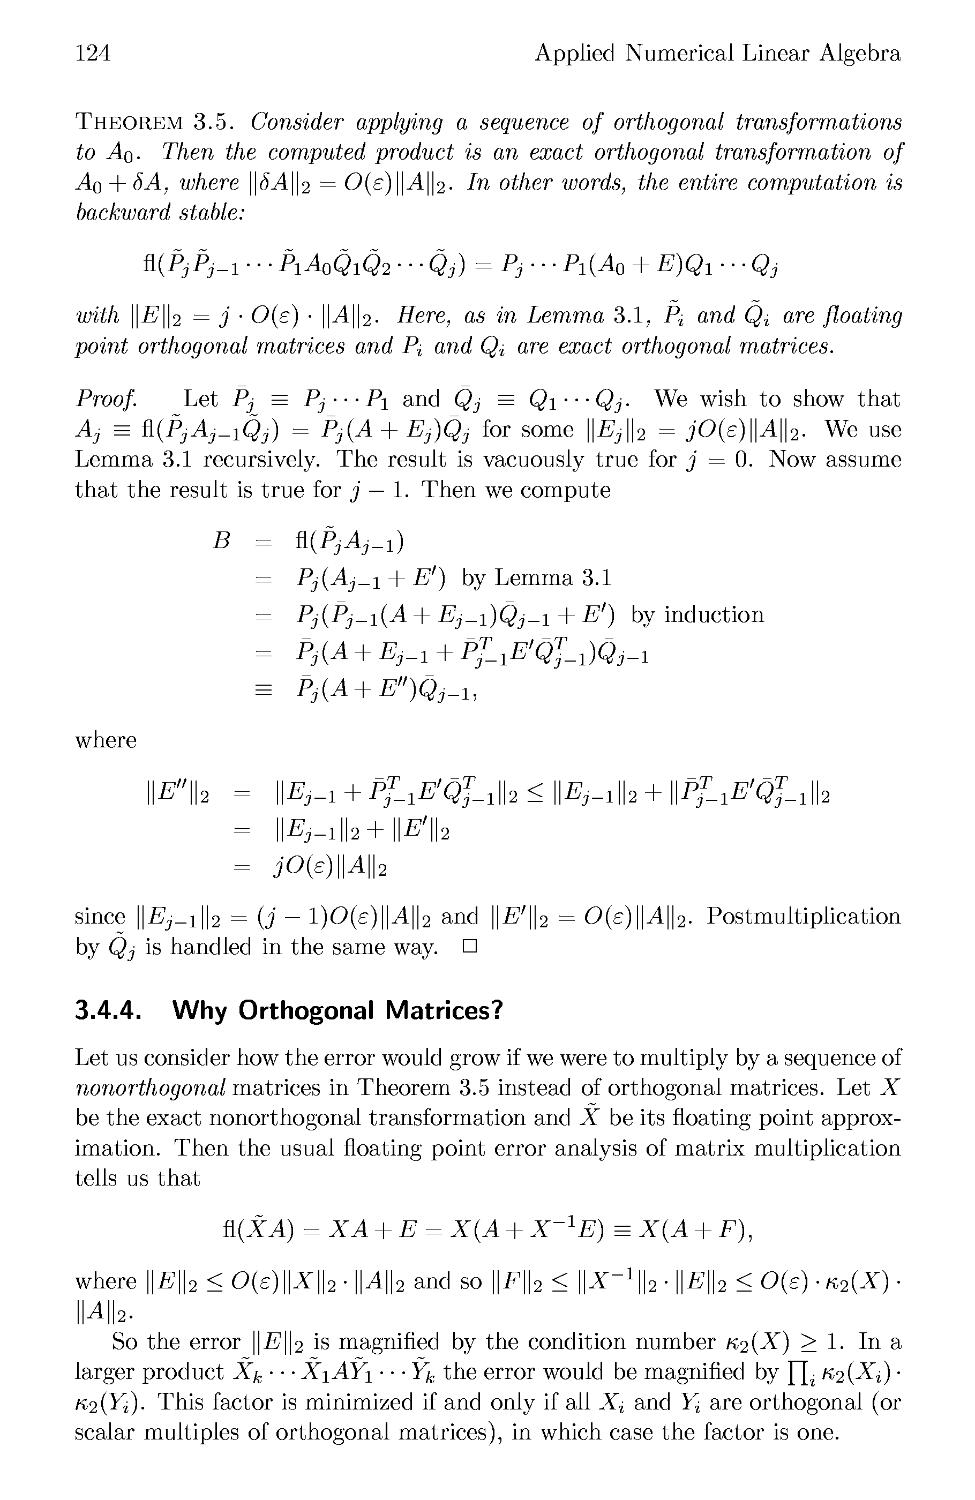 3.4.4 Why Orthogonal Matrices?